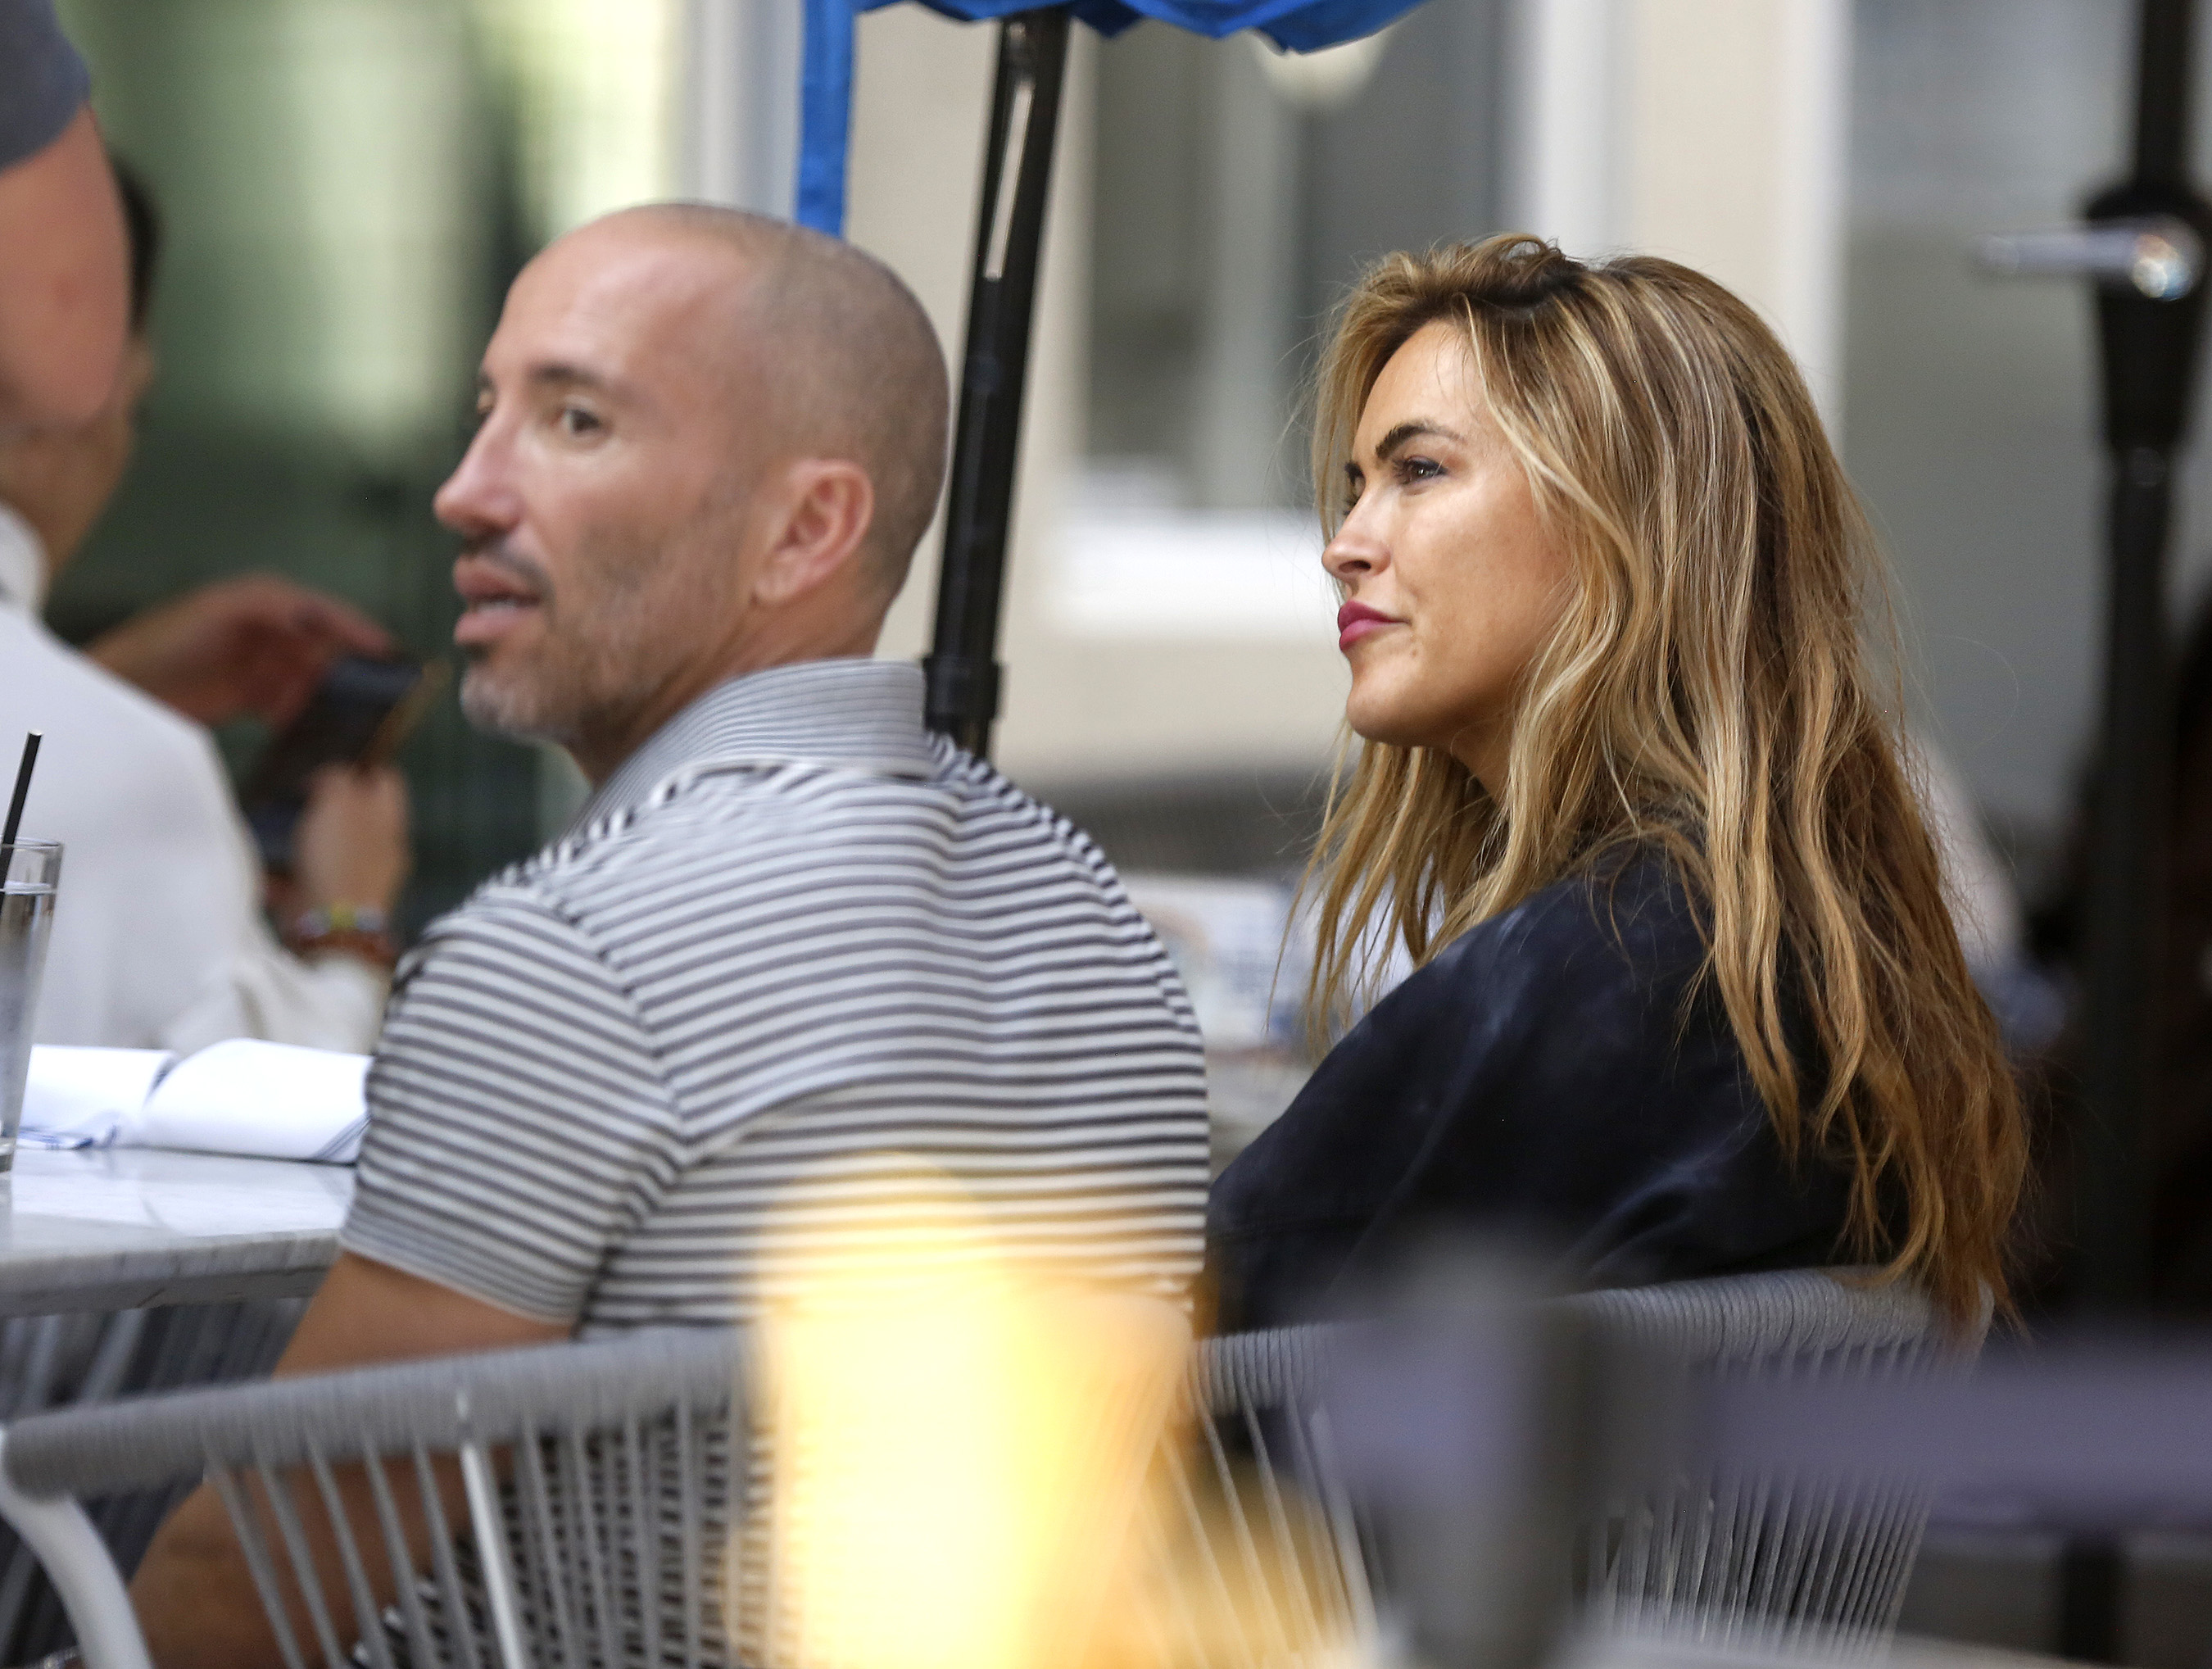 EXCLUSIVEPhoto Credit: MOVI Inc.  November 9th 2021Chrishell Stause and Jason Oppenheim loved up in L.A! The 'Selling Sunset' pair's relationship still seems to be going strong as the pair cuddle and kiss during an alfresco lunch in West Hollywood,CA